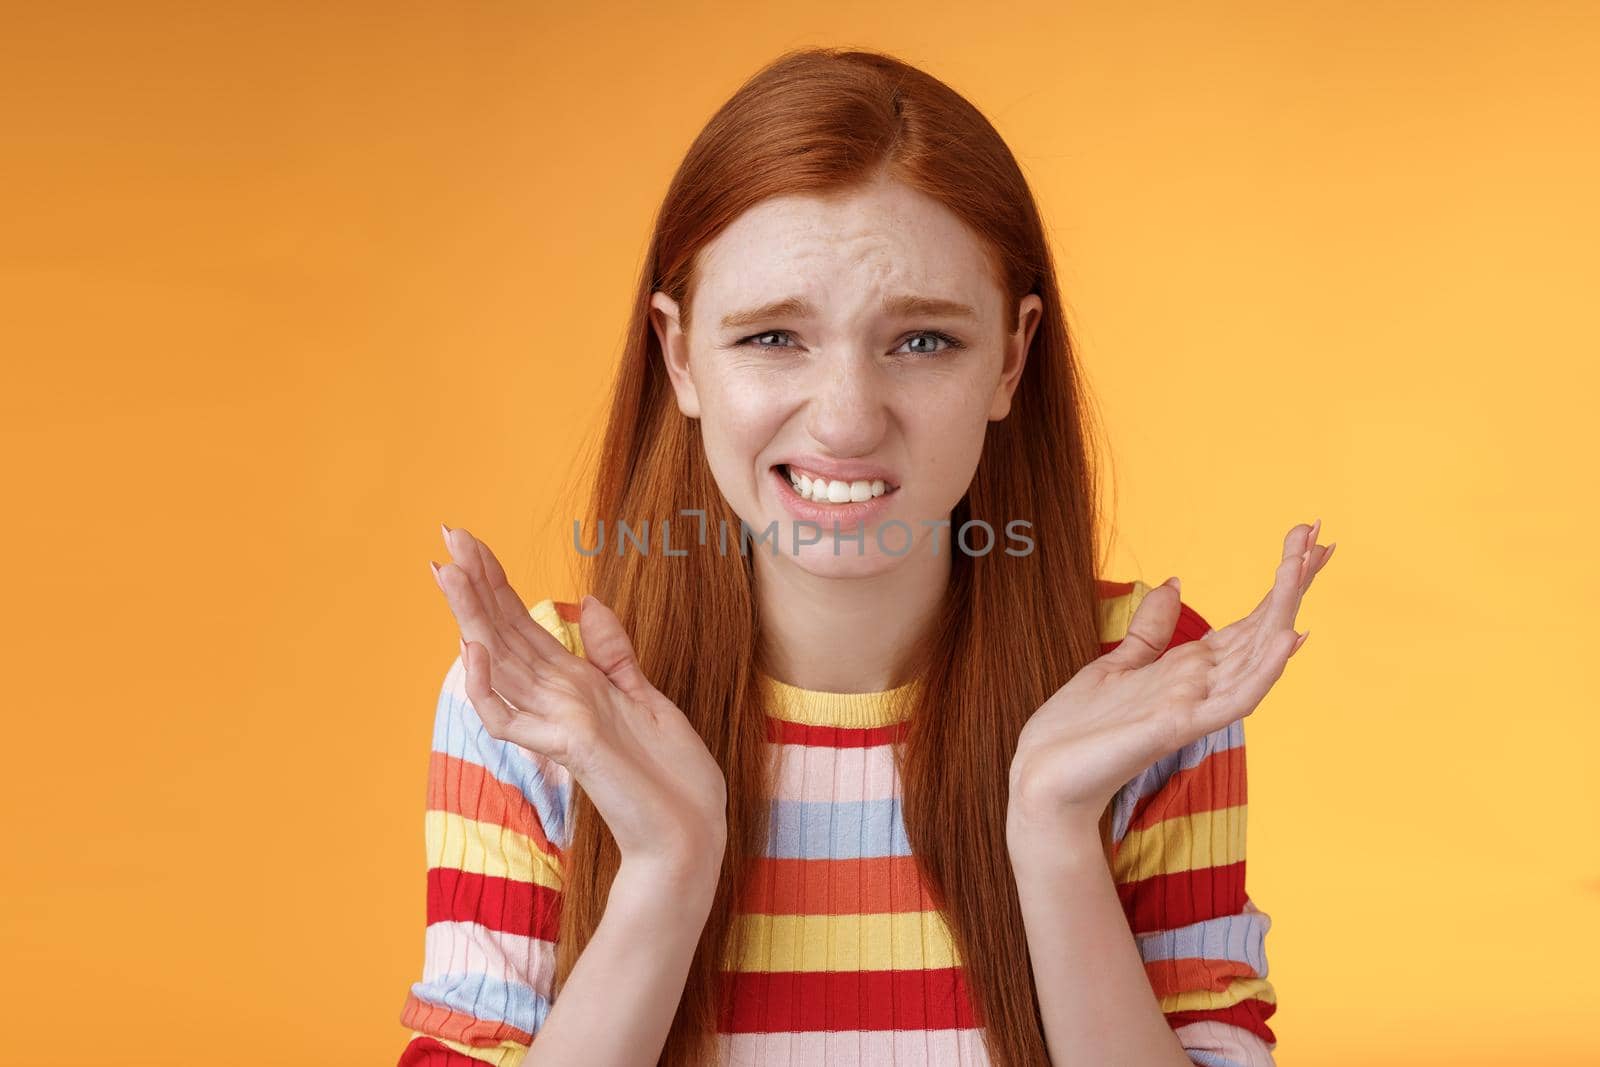 Awkward unhappy worried young redhead girl cringe feel sorry apologizing smirking smiling nervously frowning squinting spread hands sideways shrugging confused, standing orange background.